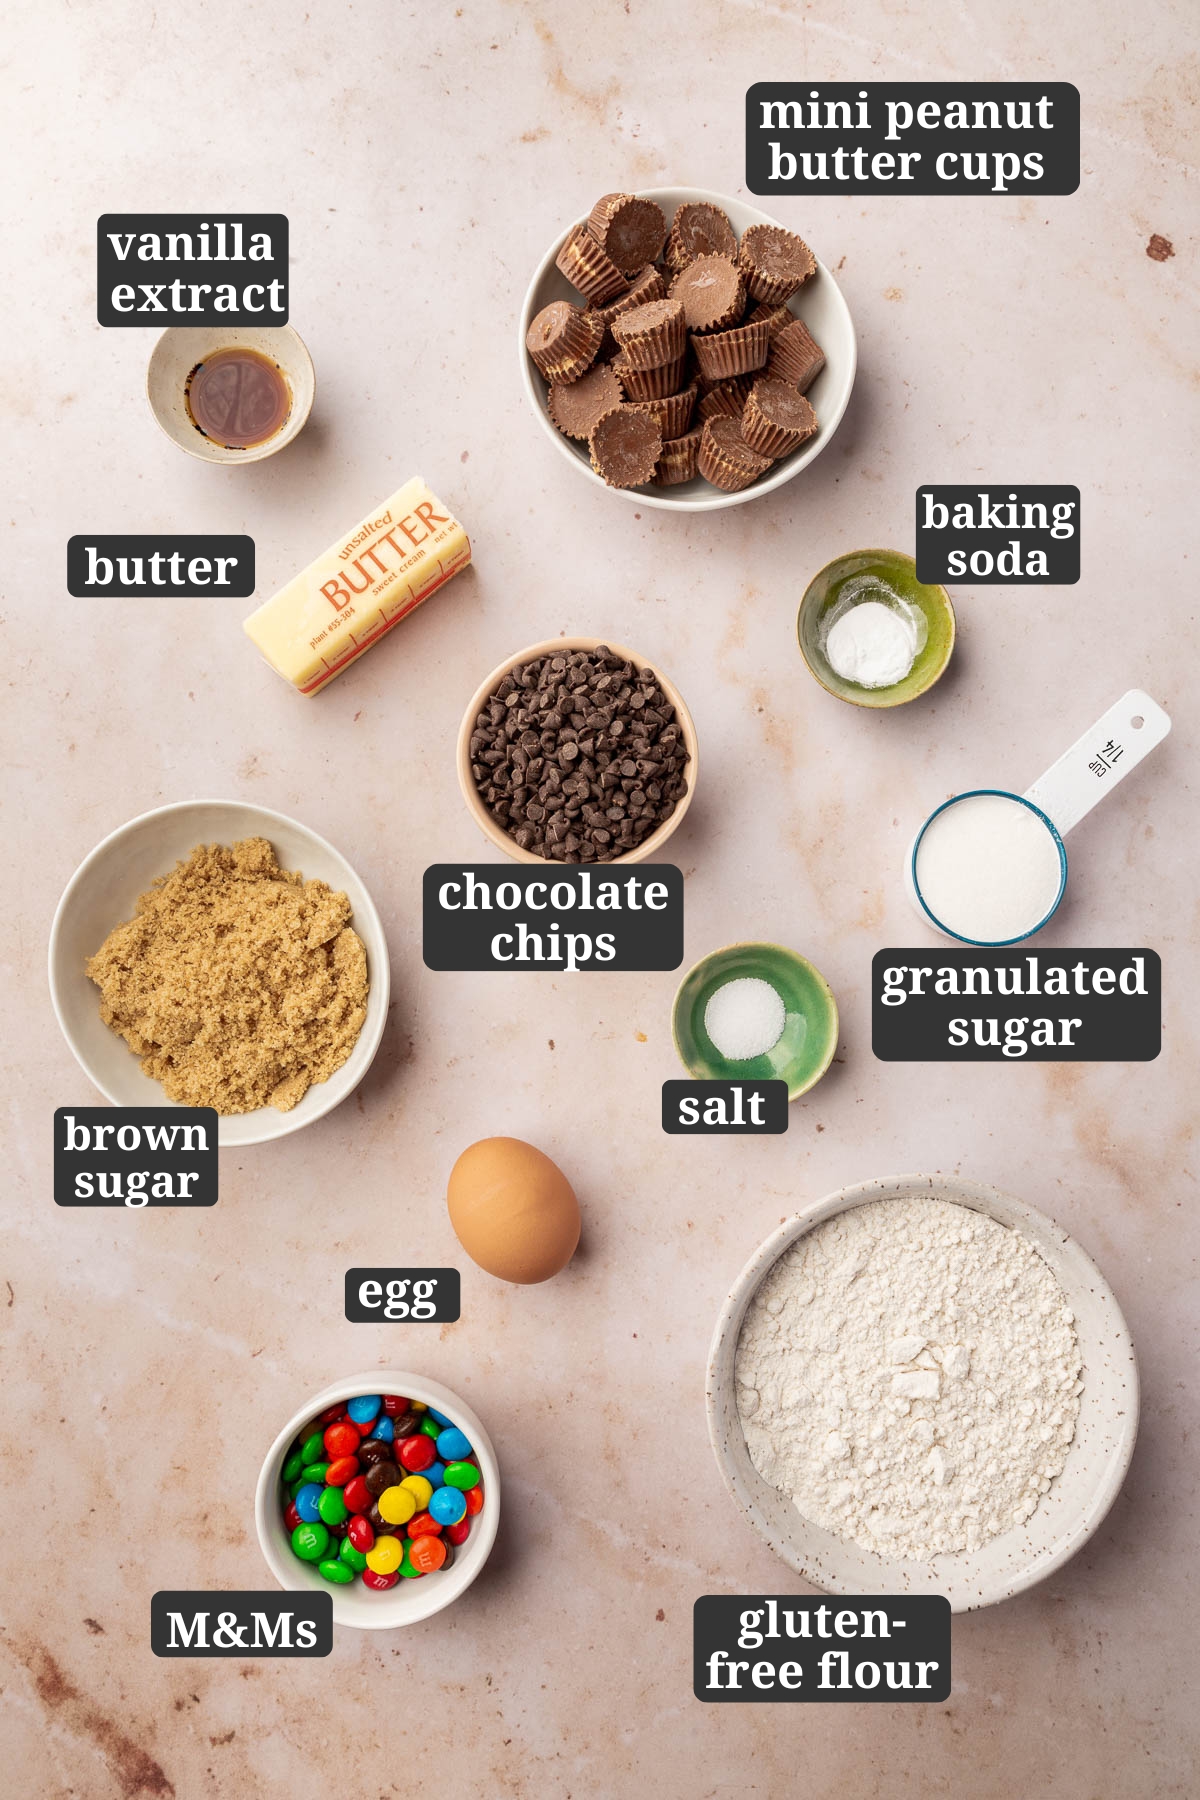 Ingredients in small bowls to make gluten-free peanut butter cup cookies with M&Ms, including mini peanut butter cups, vanilla extract, butter, chocolate chips, baking soda, brown sugar, egg, salt, granulated sugar, M&Ms and gluten-free flour with text overlays over each ingredient.